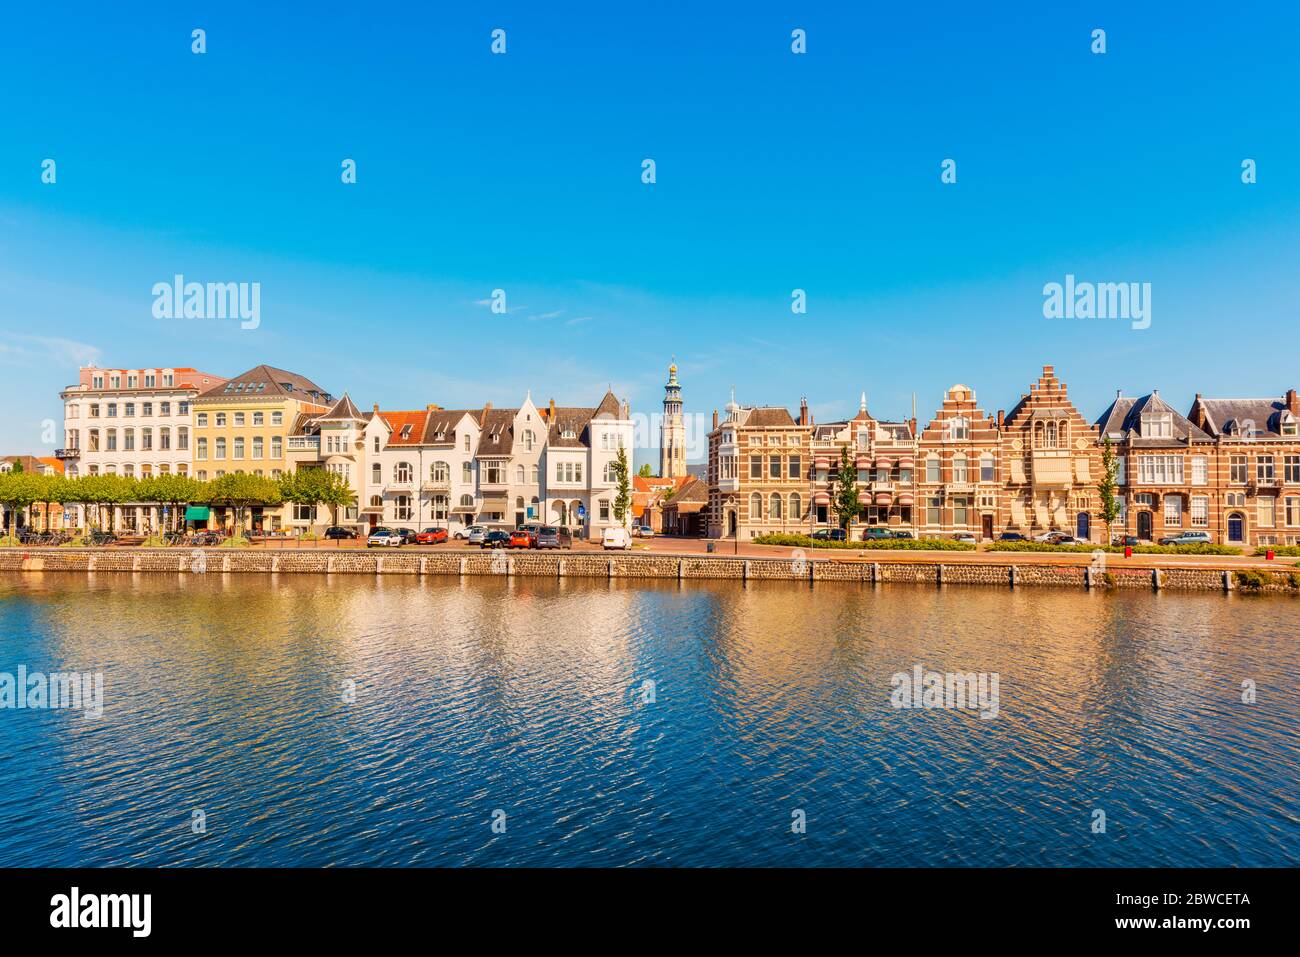 Canal in Middelburg, Zeeland province, Netherlands on sunny spring day. Middelburg is the capital of Zeeland and has about 42,000 inhabitants. Stock Photo